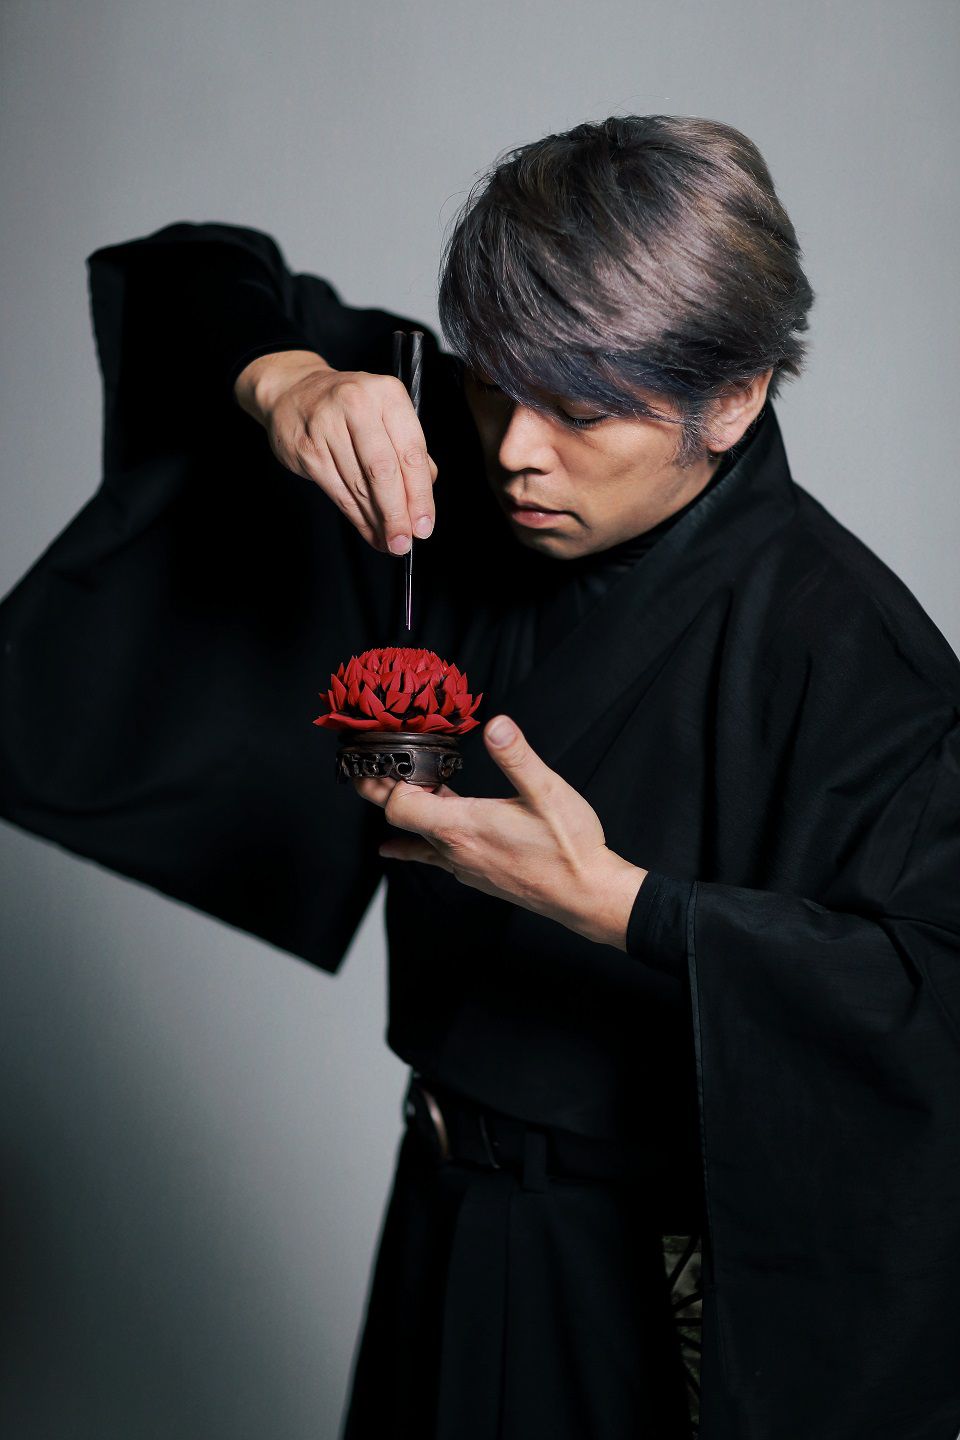 Mitsubori shapes his creations masterfully with specially ordered needles and shears